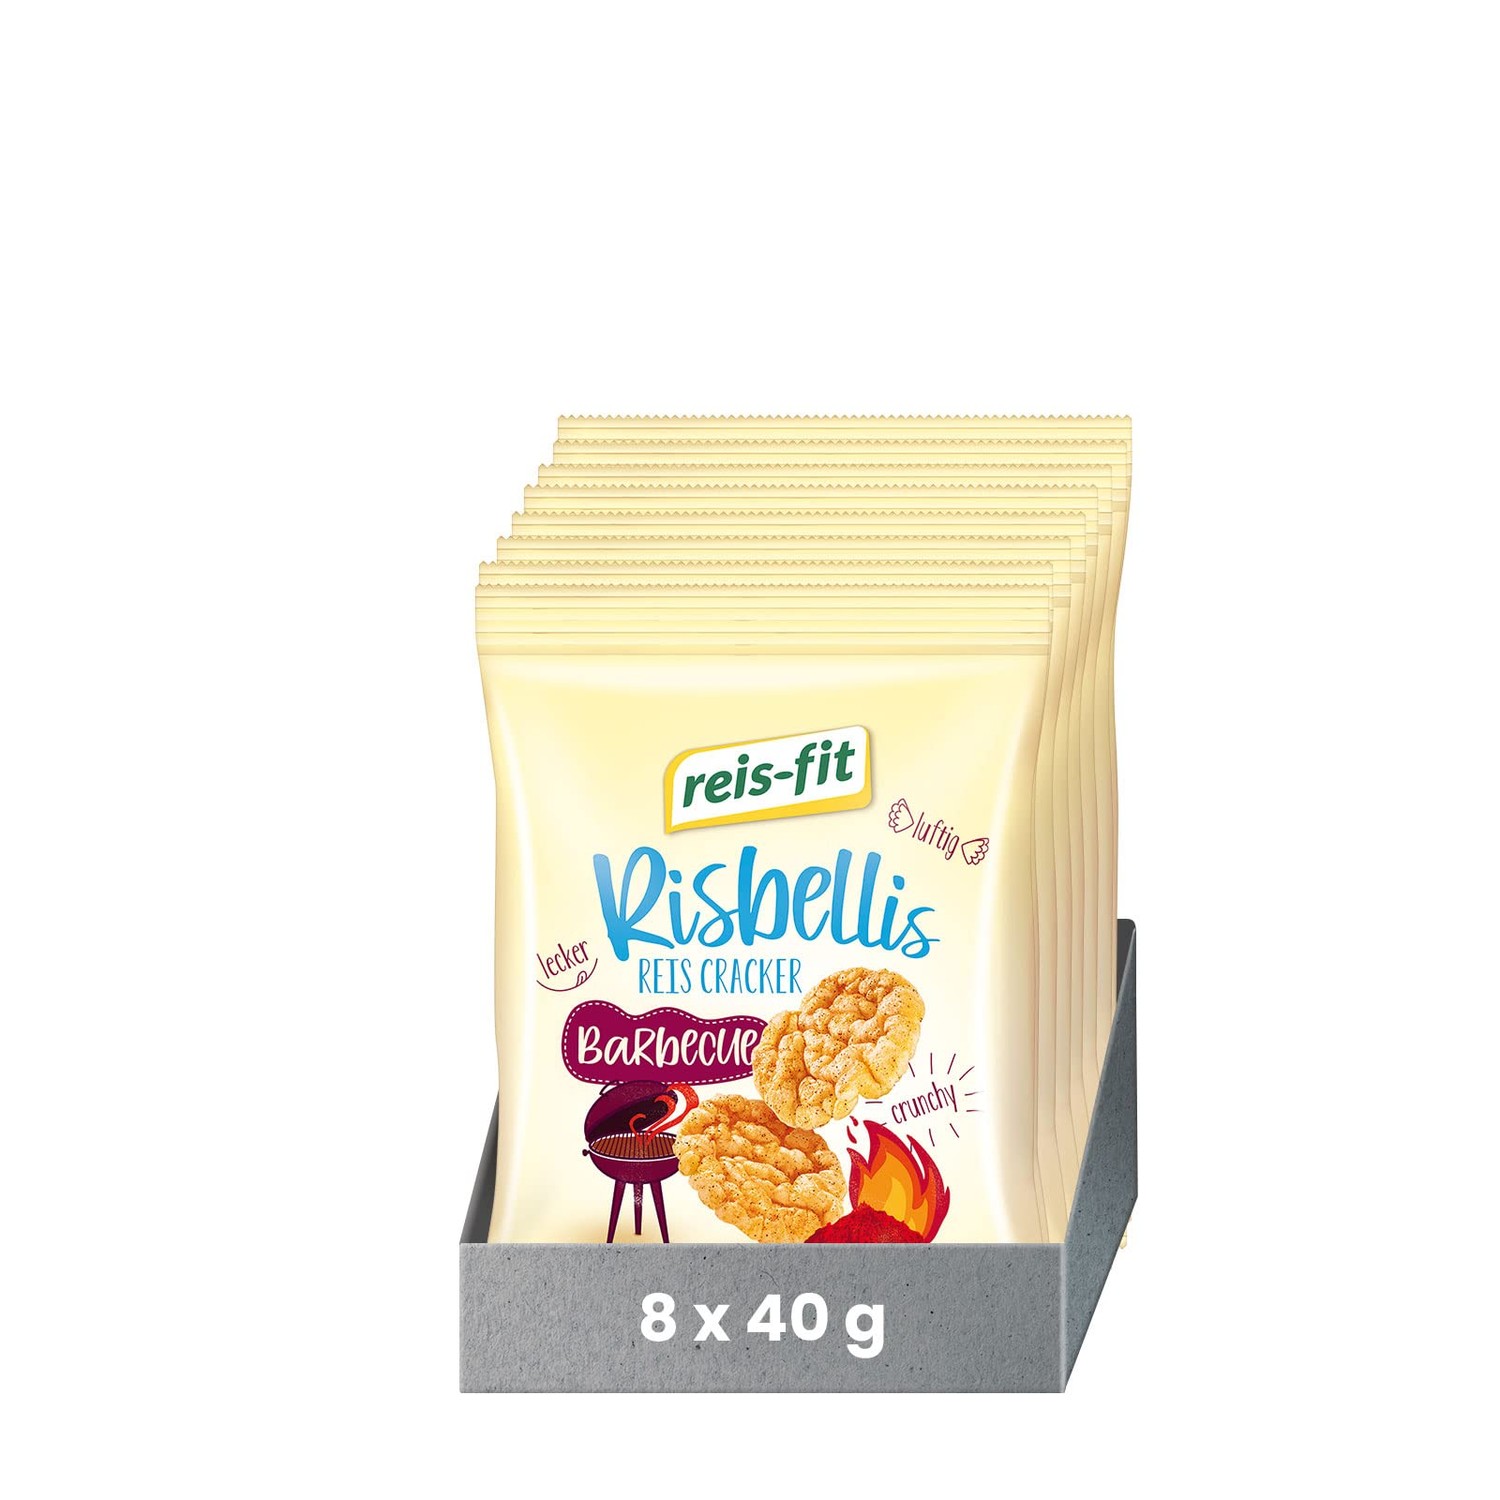 the 40 Risbellis g, Go Gluten-Free, on Snack Barbecue x reis-fit Vegan, Crispy, Rice Waffle 8 for